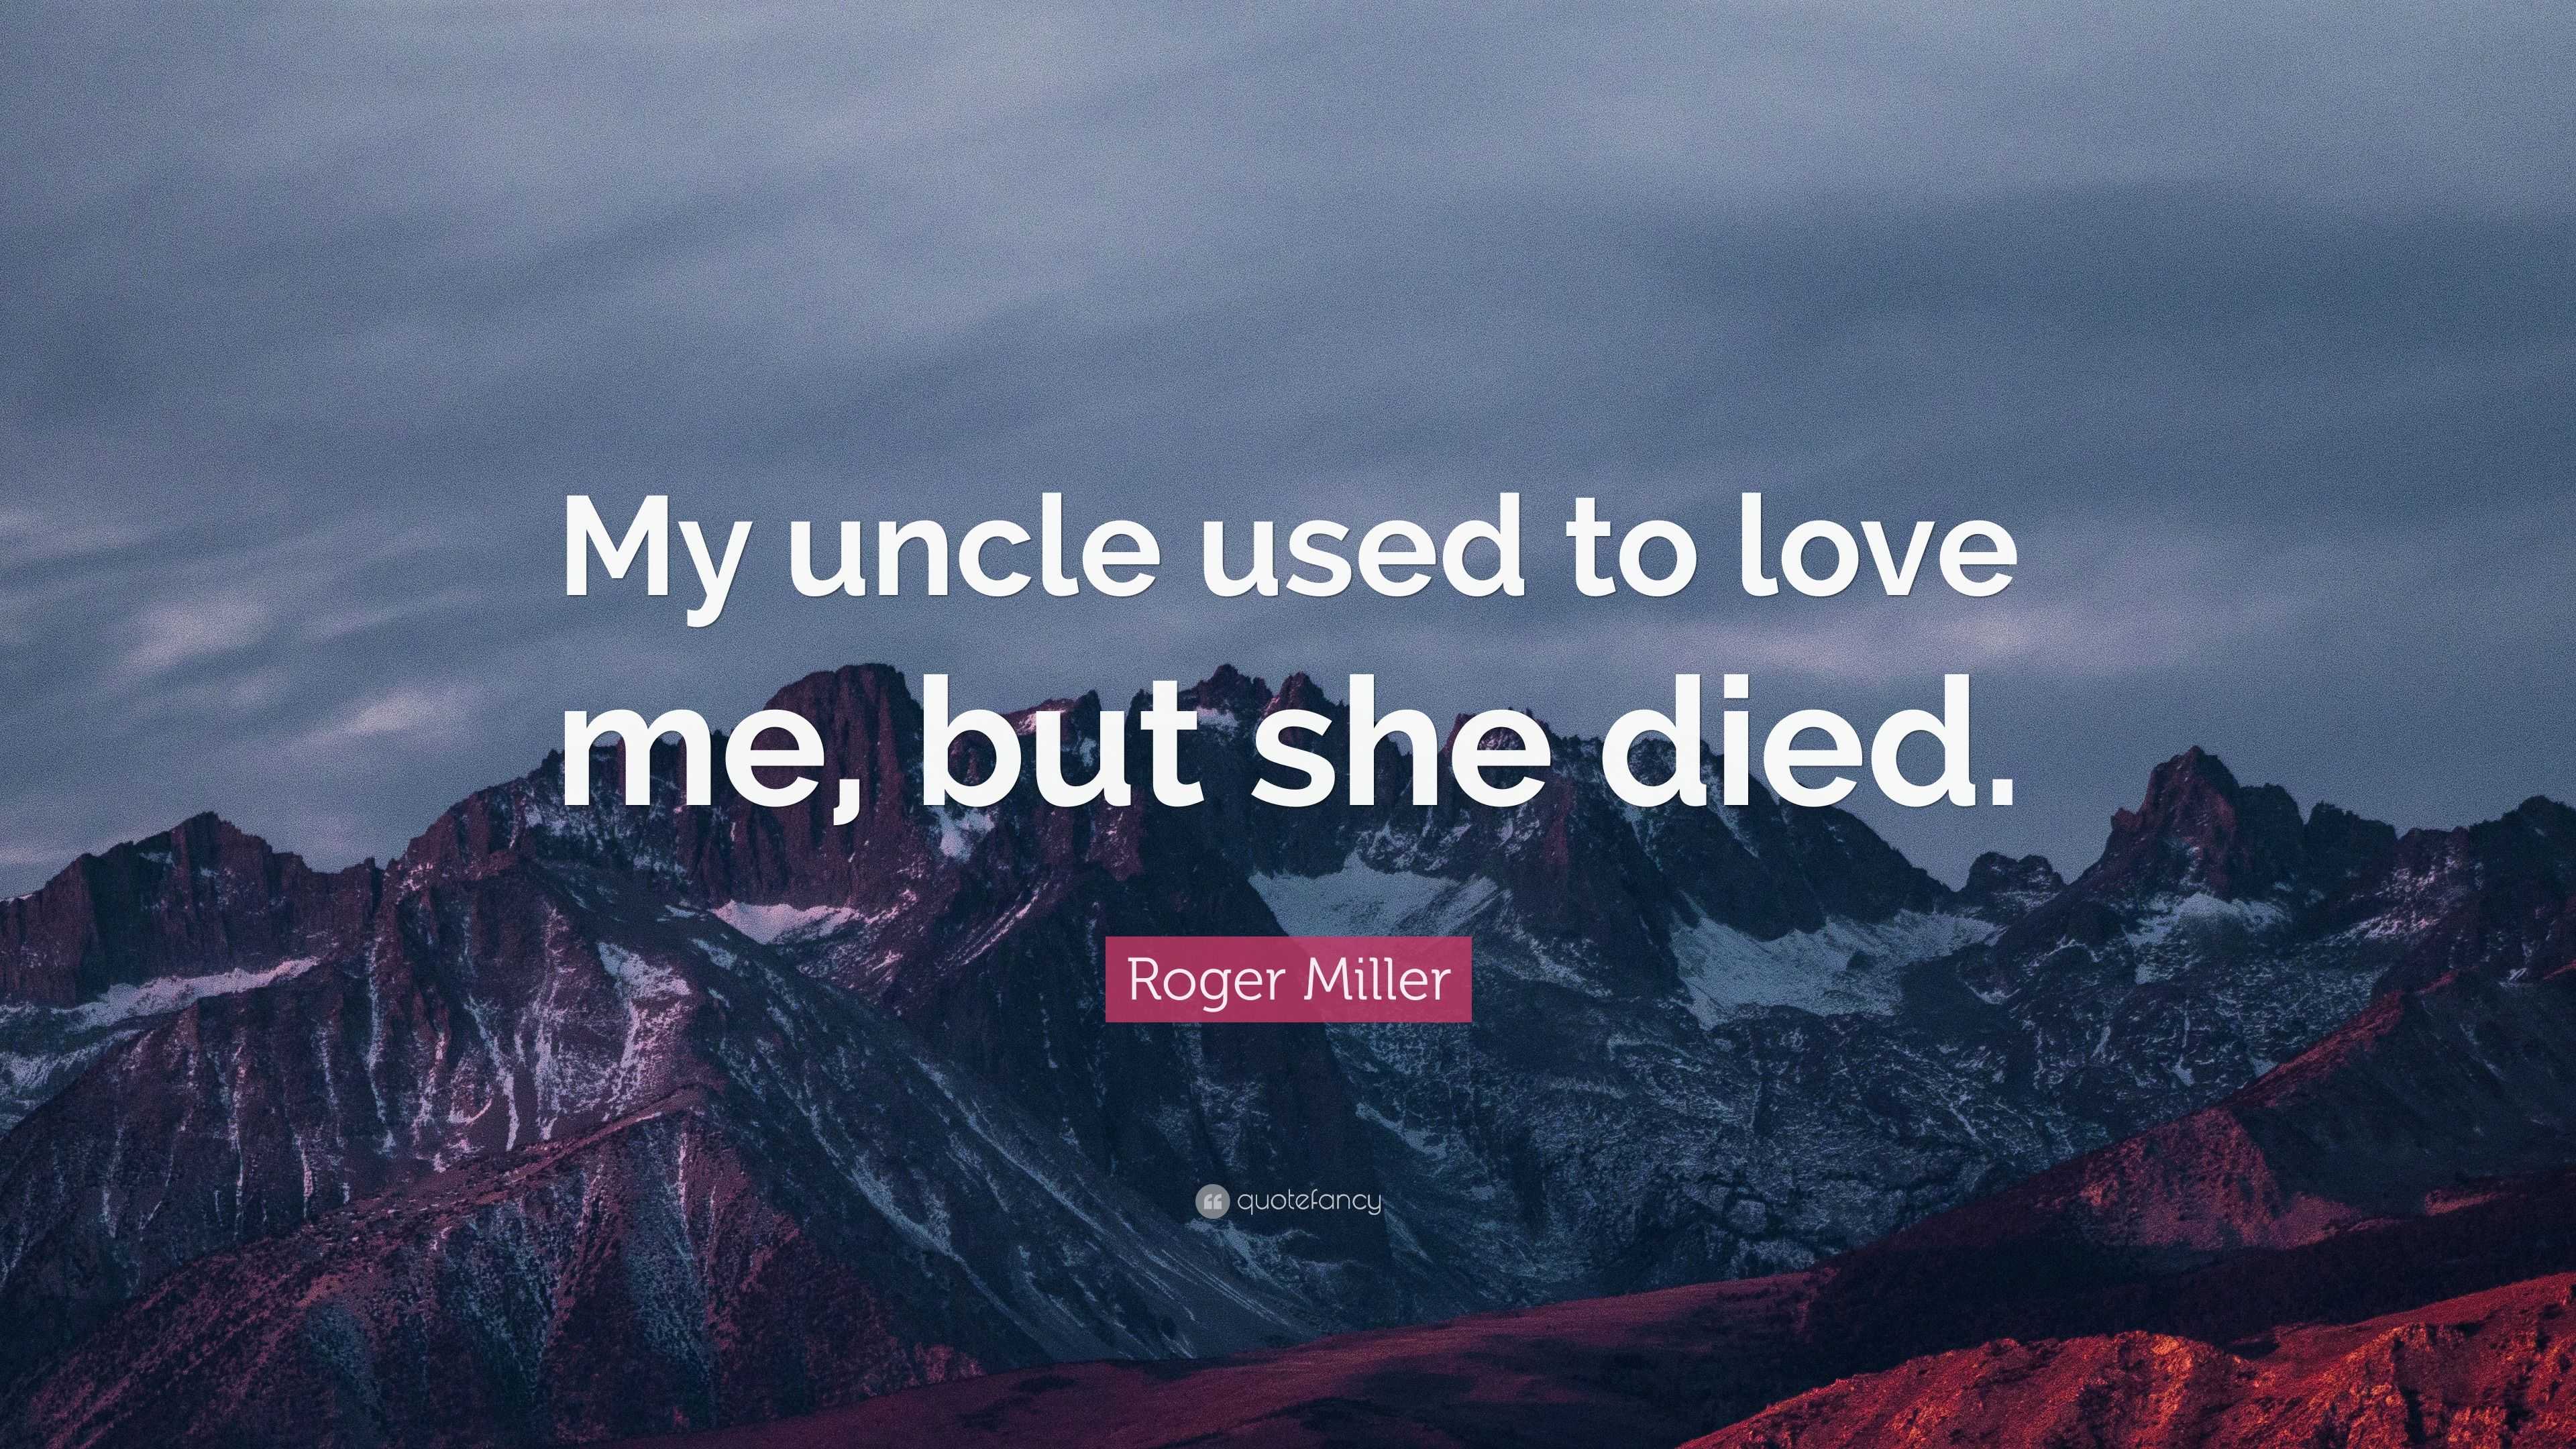 Roger Miller: My Uncle Used To Love Me But She Died / You're My